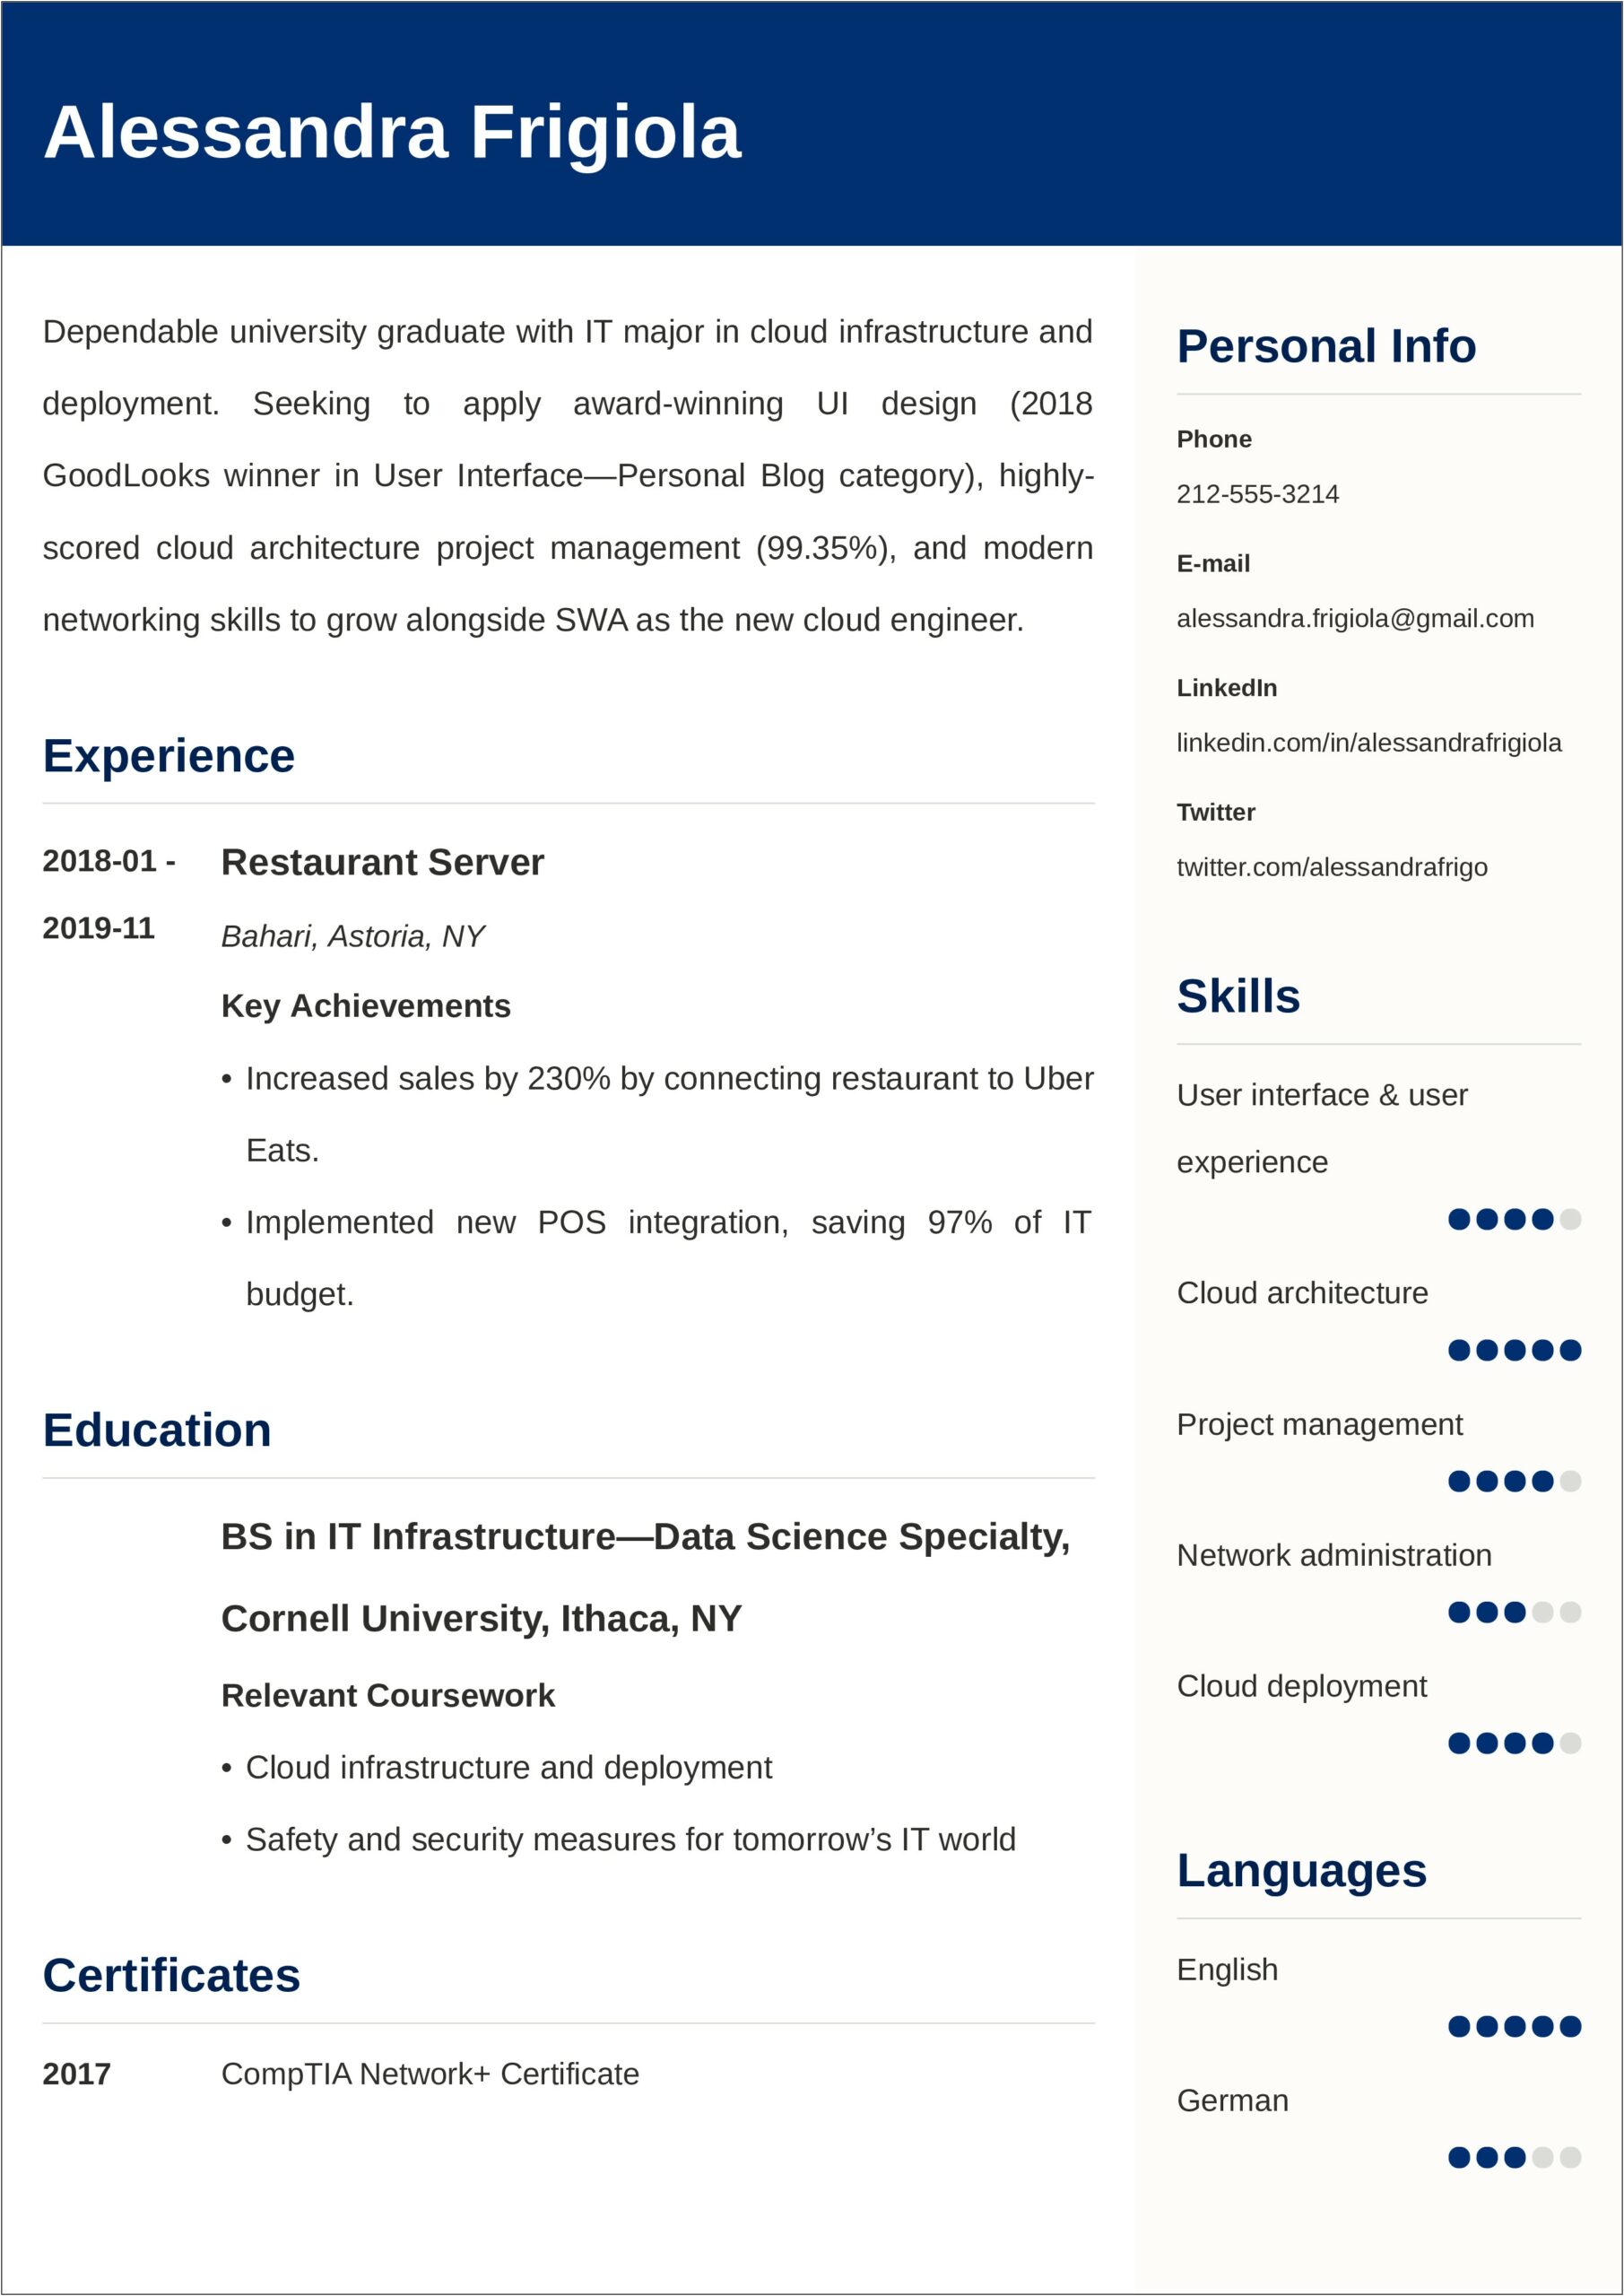 Resume Skill Working With People At Different Levels